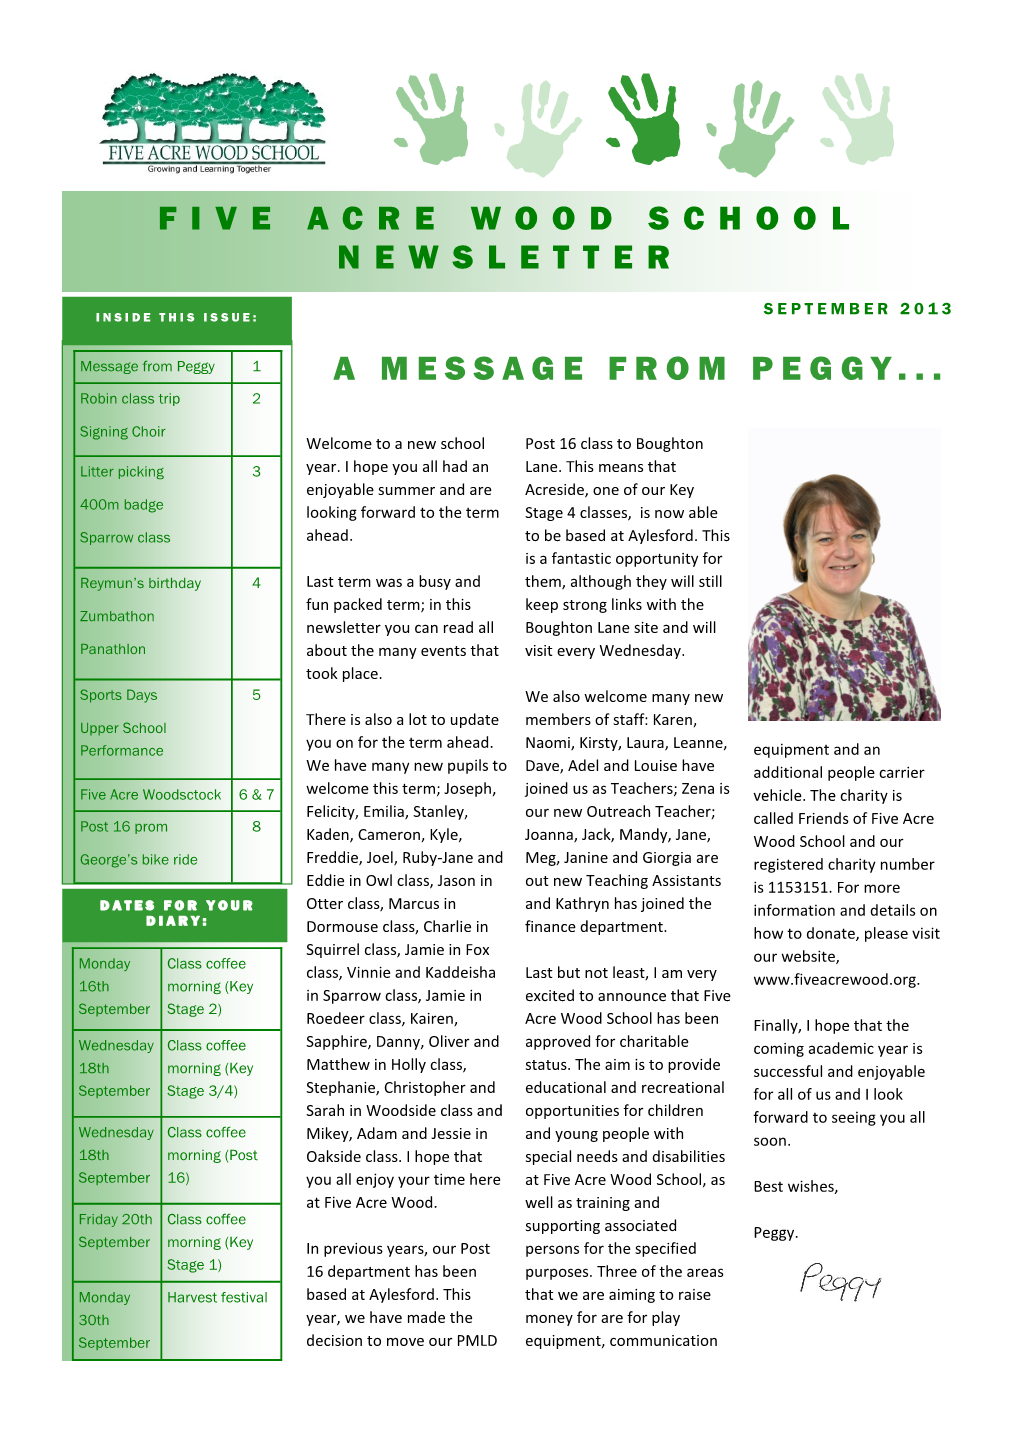 A Message from Peggy... Five Acre Wood School